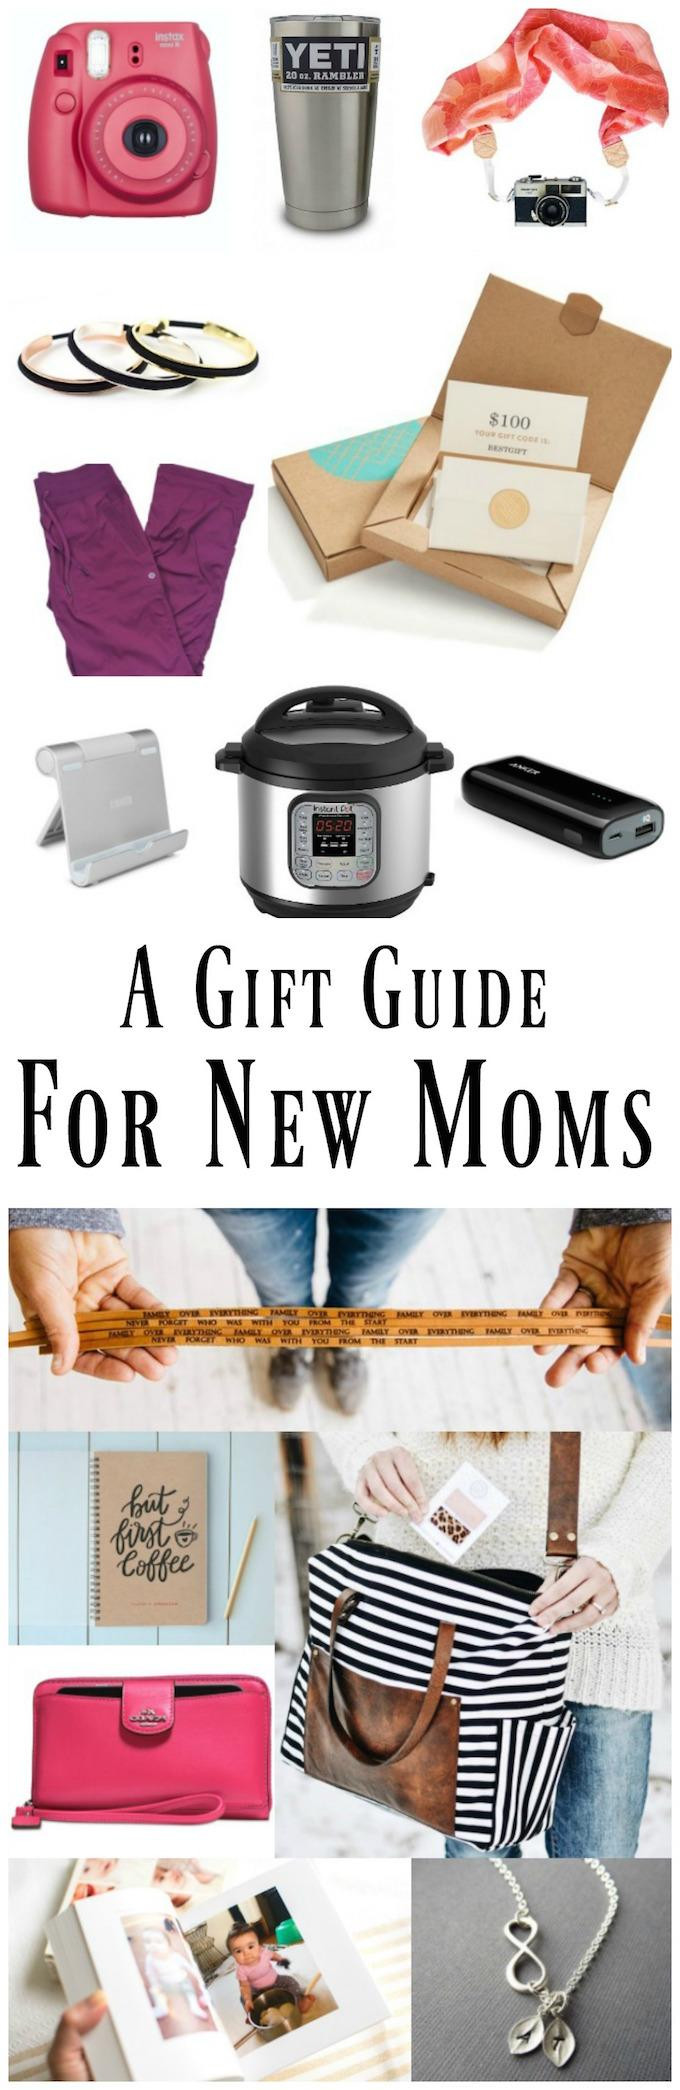 Gift Ideas For Girlfriends Mom
 Gifts For New Moms